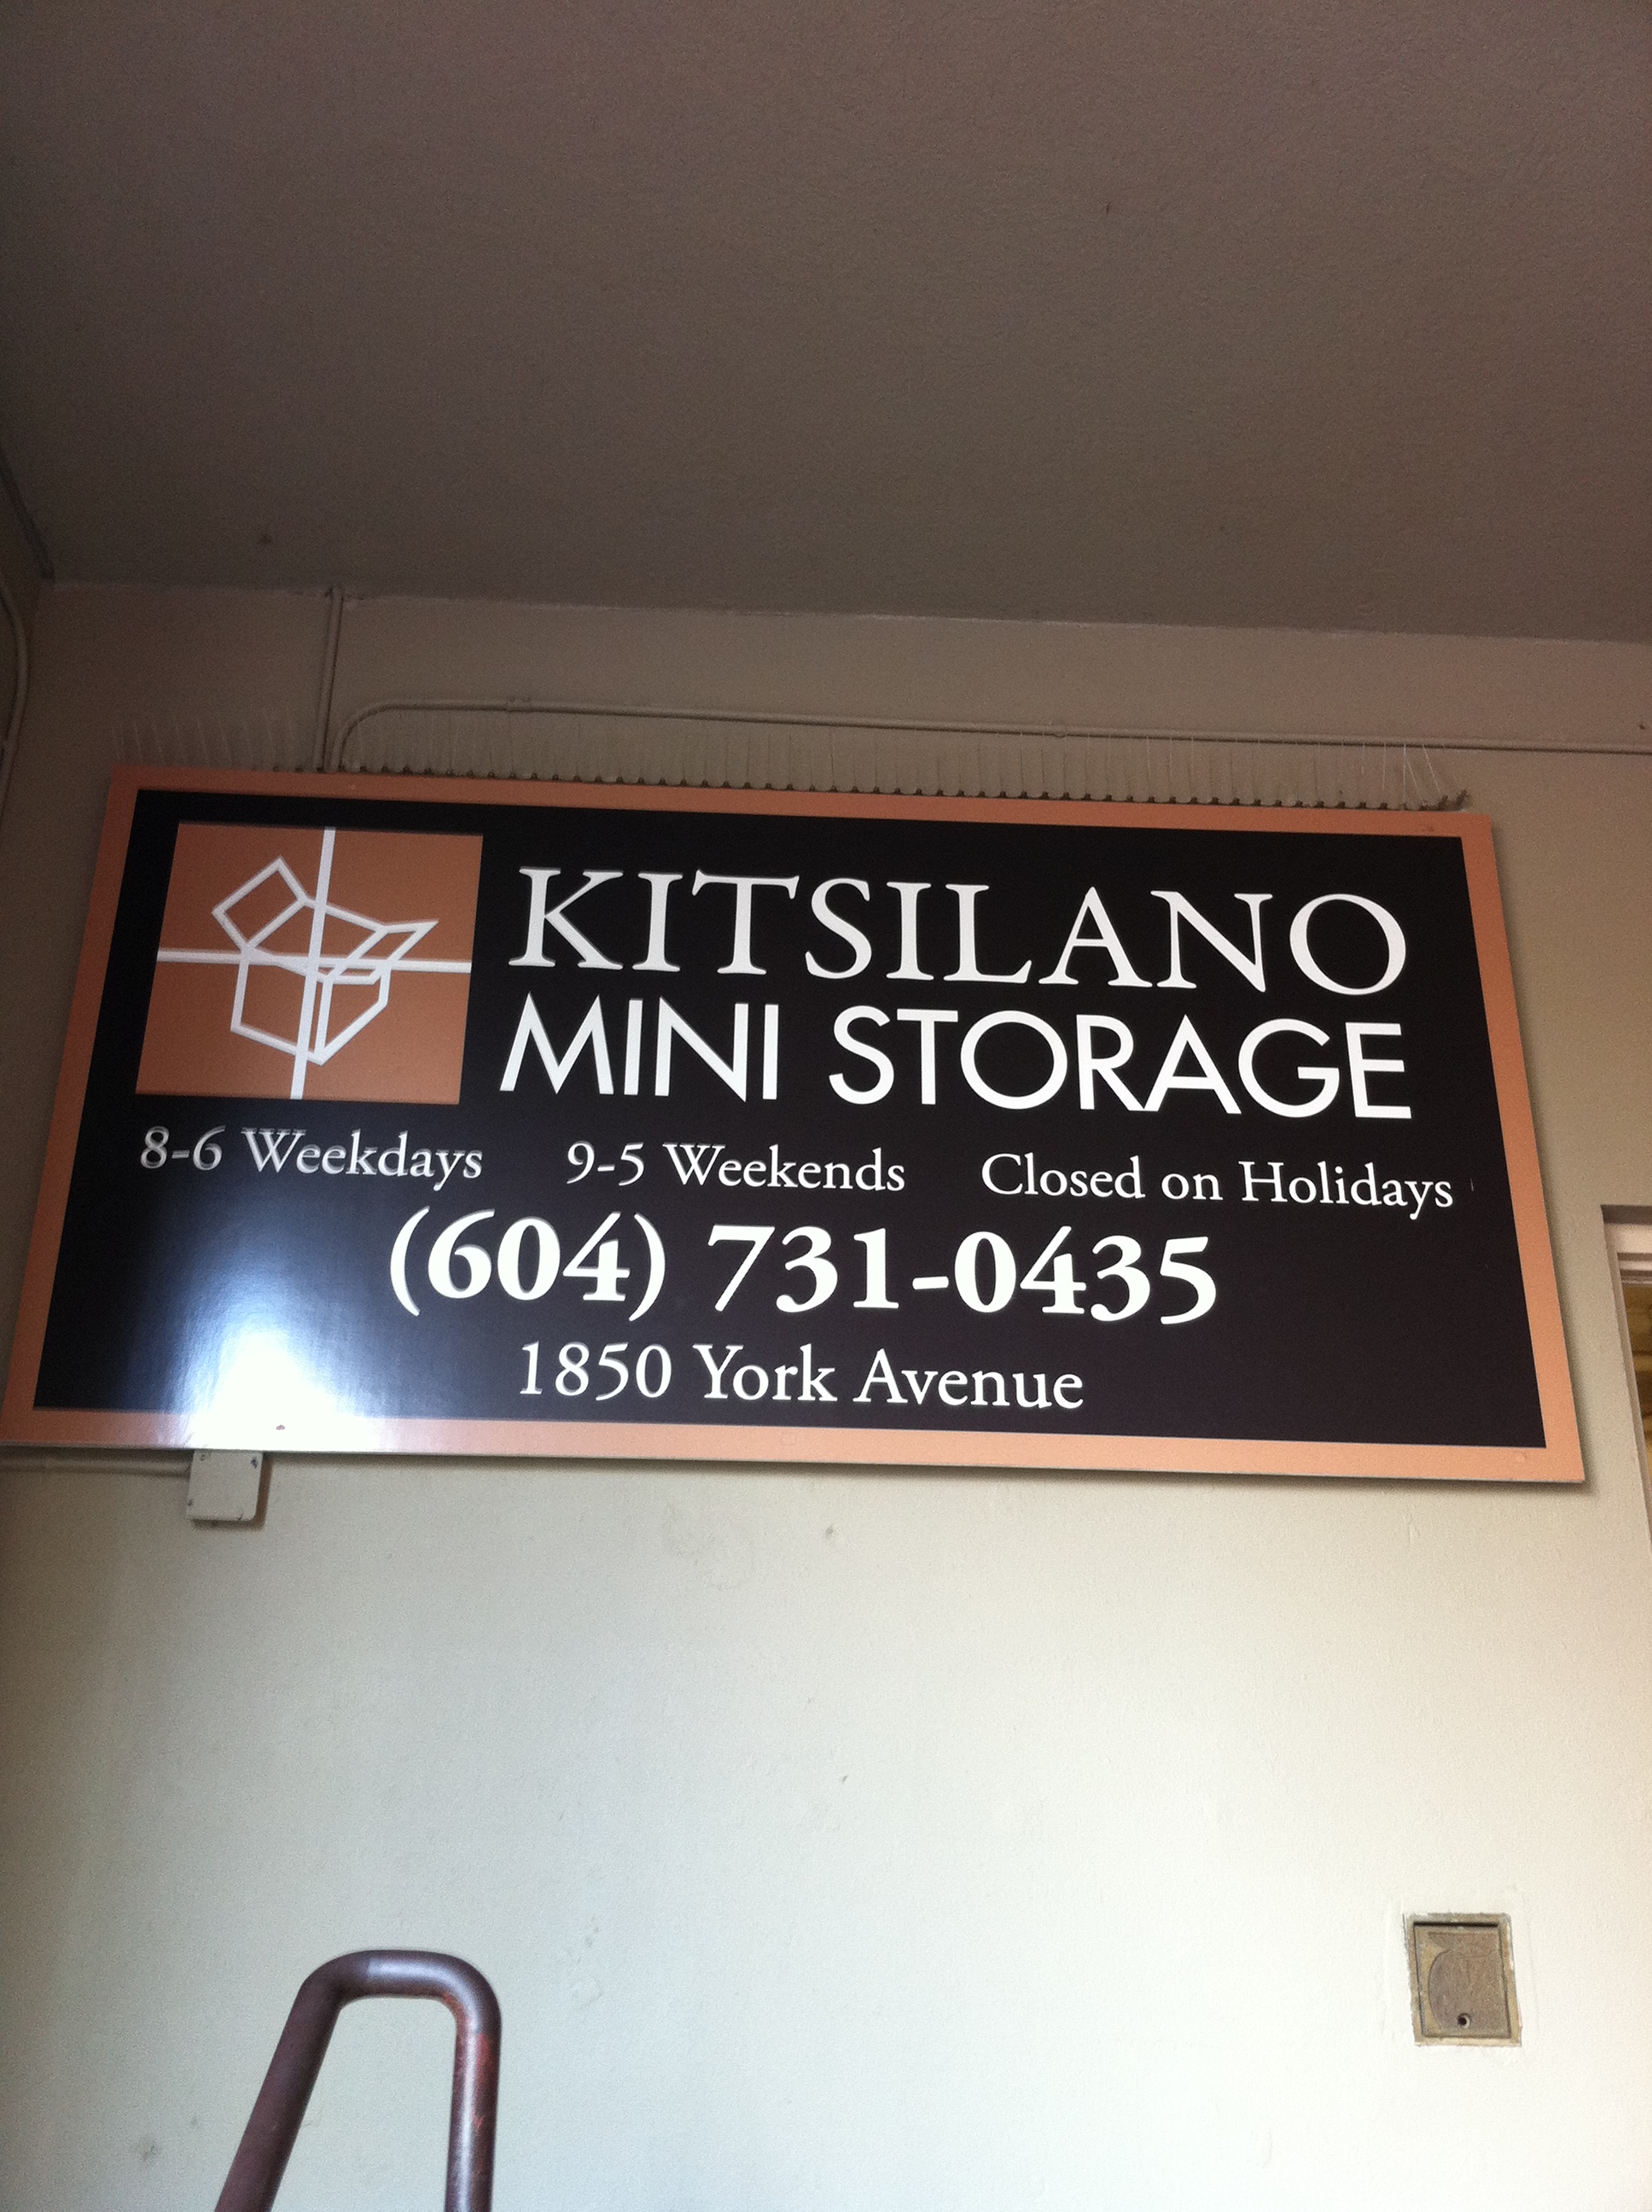 Queen Mattress and Box Spring Delivery from Kitsilano Mini Storage to Downtown Vancouver Sam's